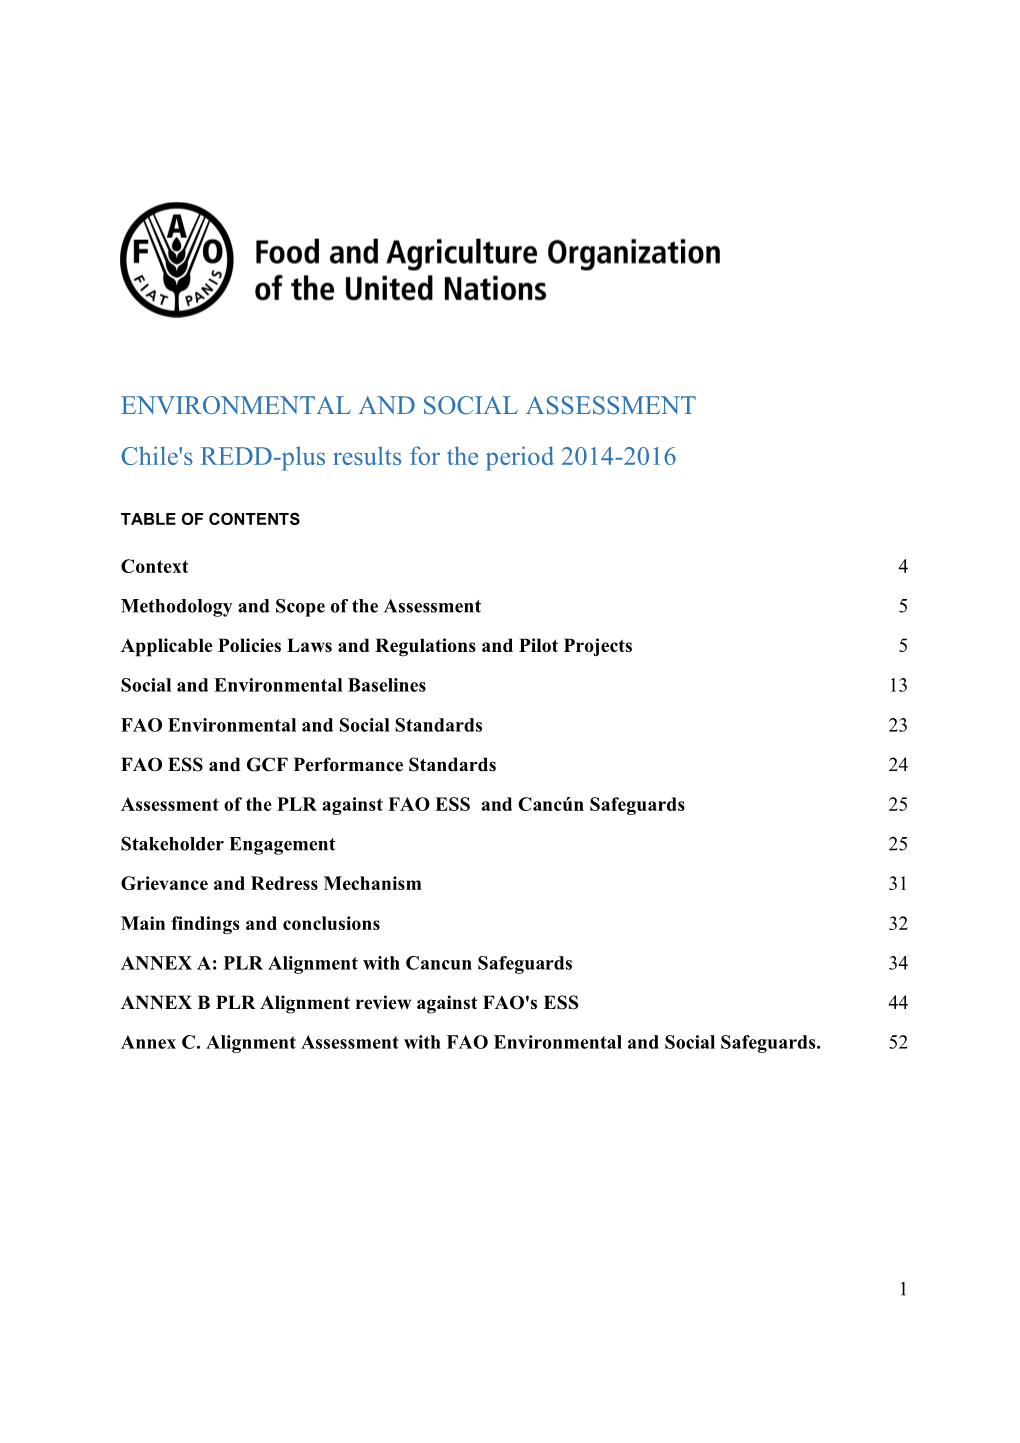 ENVIRONMENTAL and SOCIAL ASSESSMENT Chile's REDD-Plus Results for the Period 2014-2016